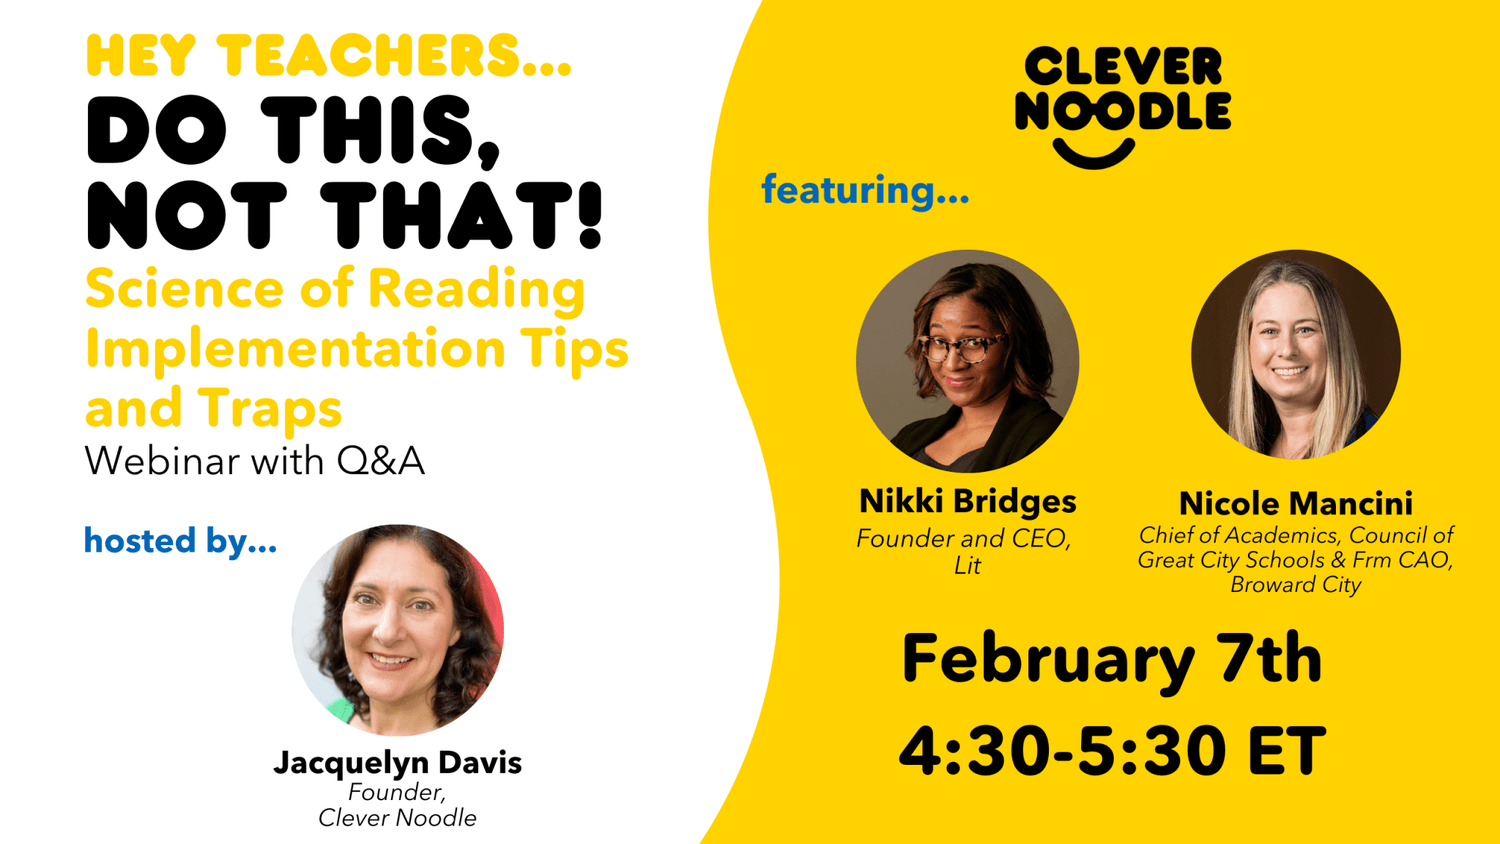 Webinar: This, Not That: Science of Reading Implementation Tips and Traps - Clever Noodle